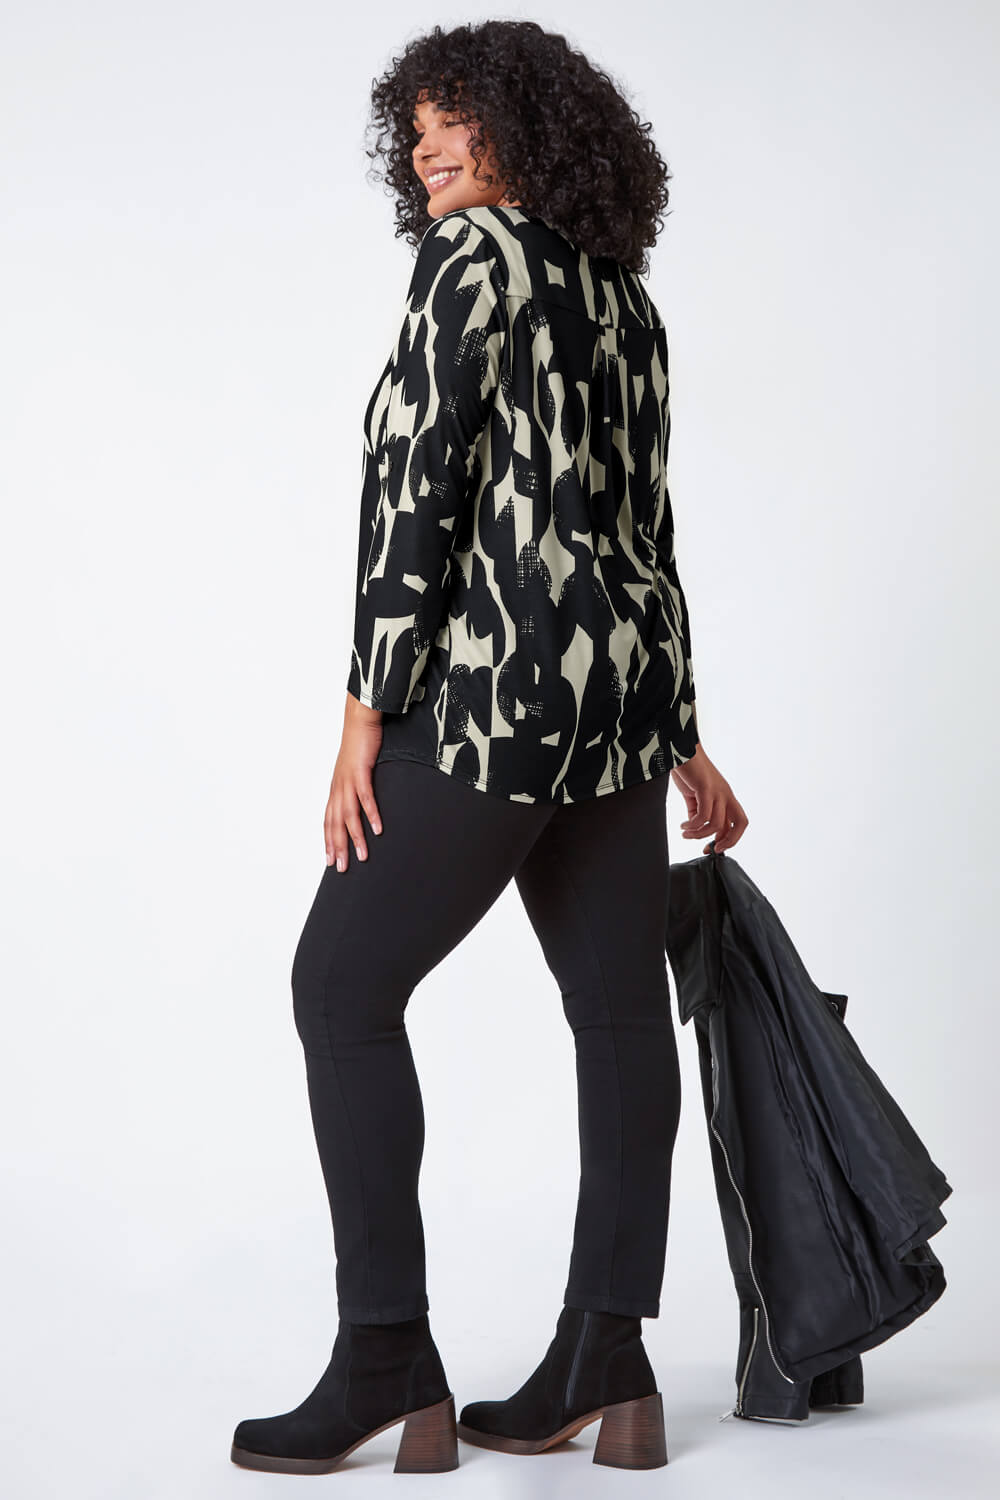 Black Curve Abstract Print Jersey Top, Image 3 of 5